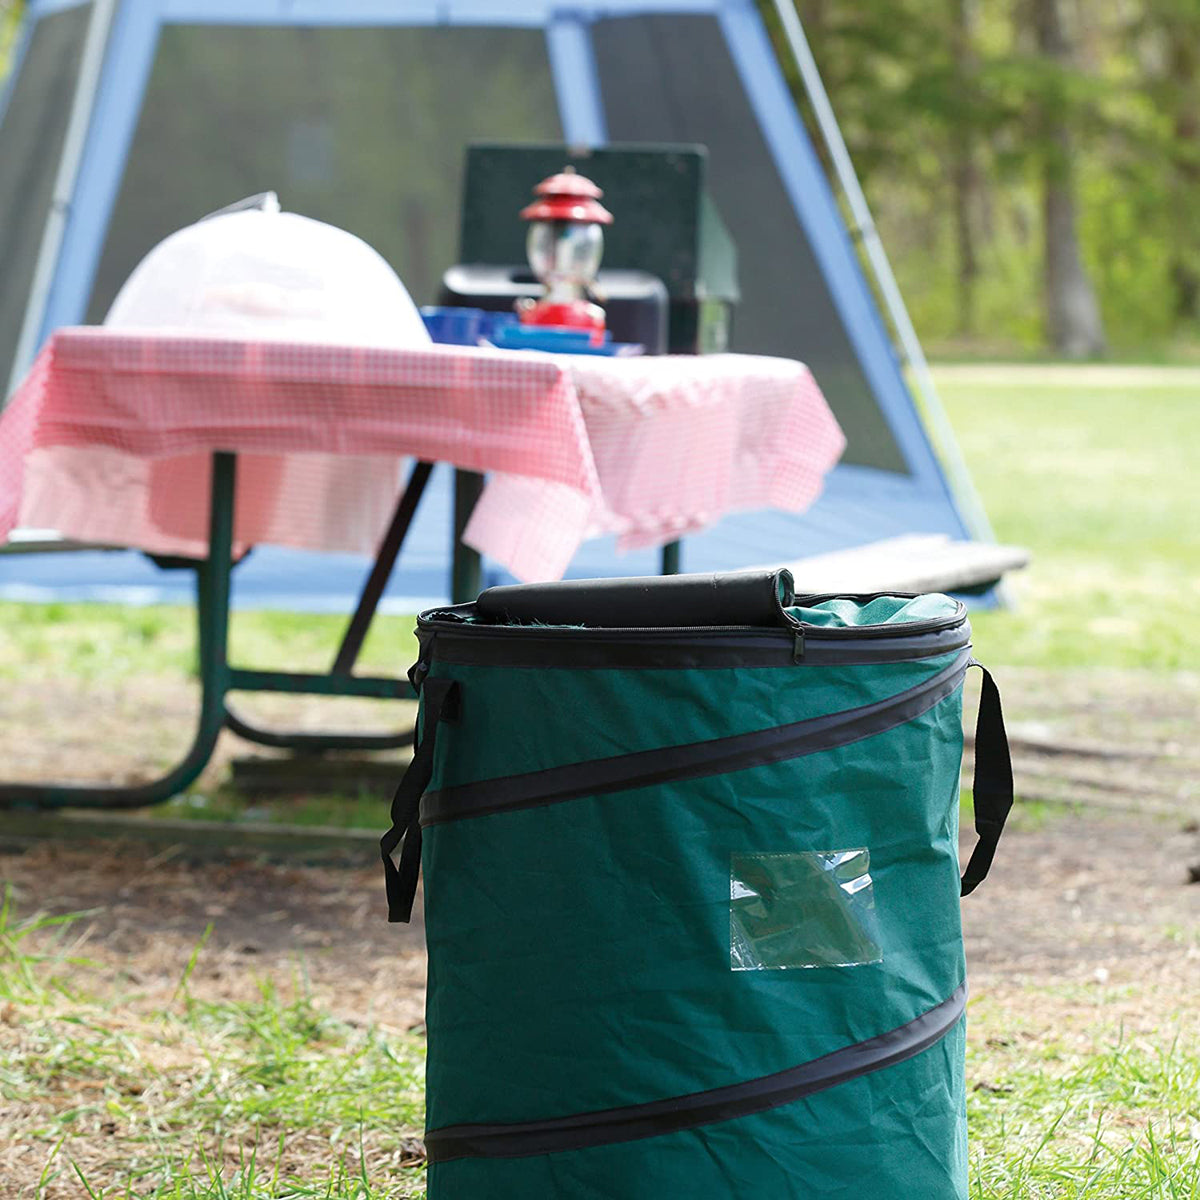 Coghlan's Pop-Up Camp Trash Can/Recycle Bin, Portable Collapsible Camping Basket Coghlan's